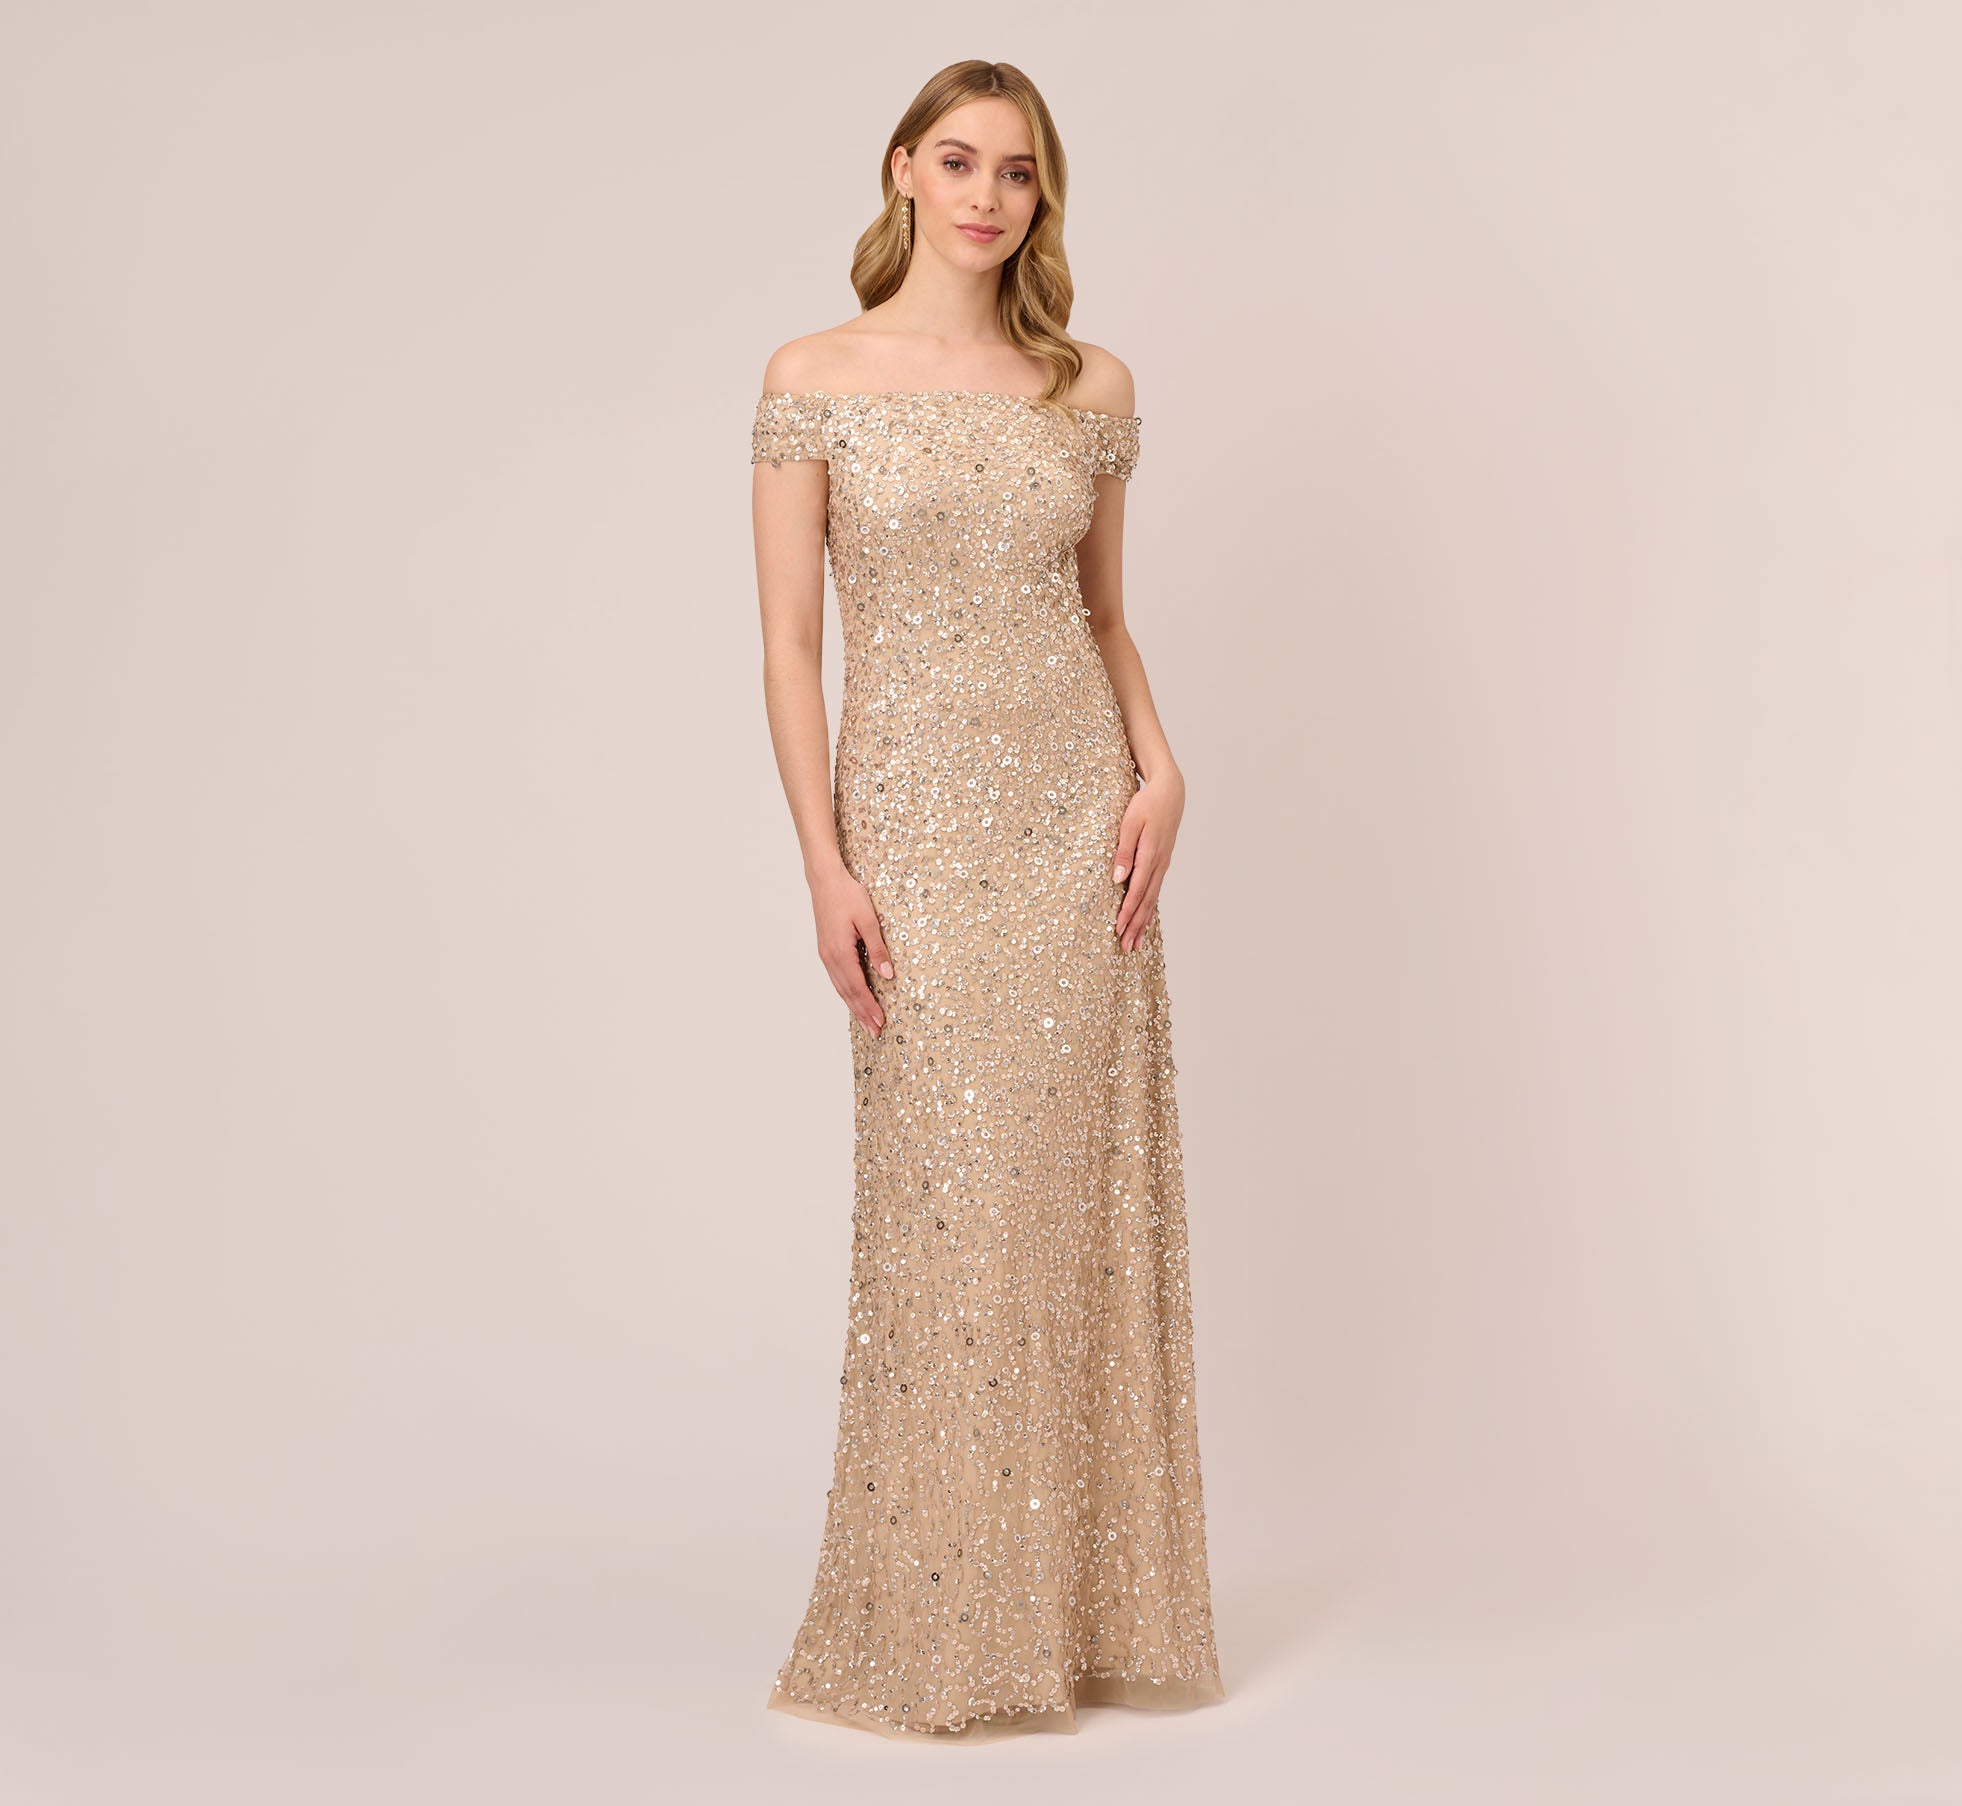 Adrianna Papell Champagne Off Shoulder Sequin Wedding Dress